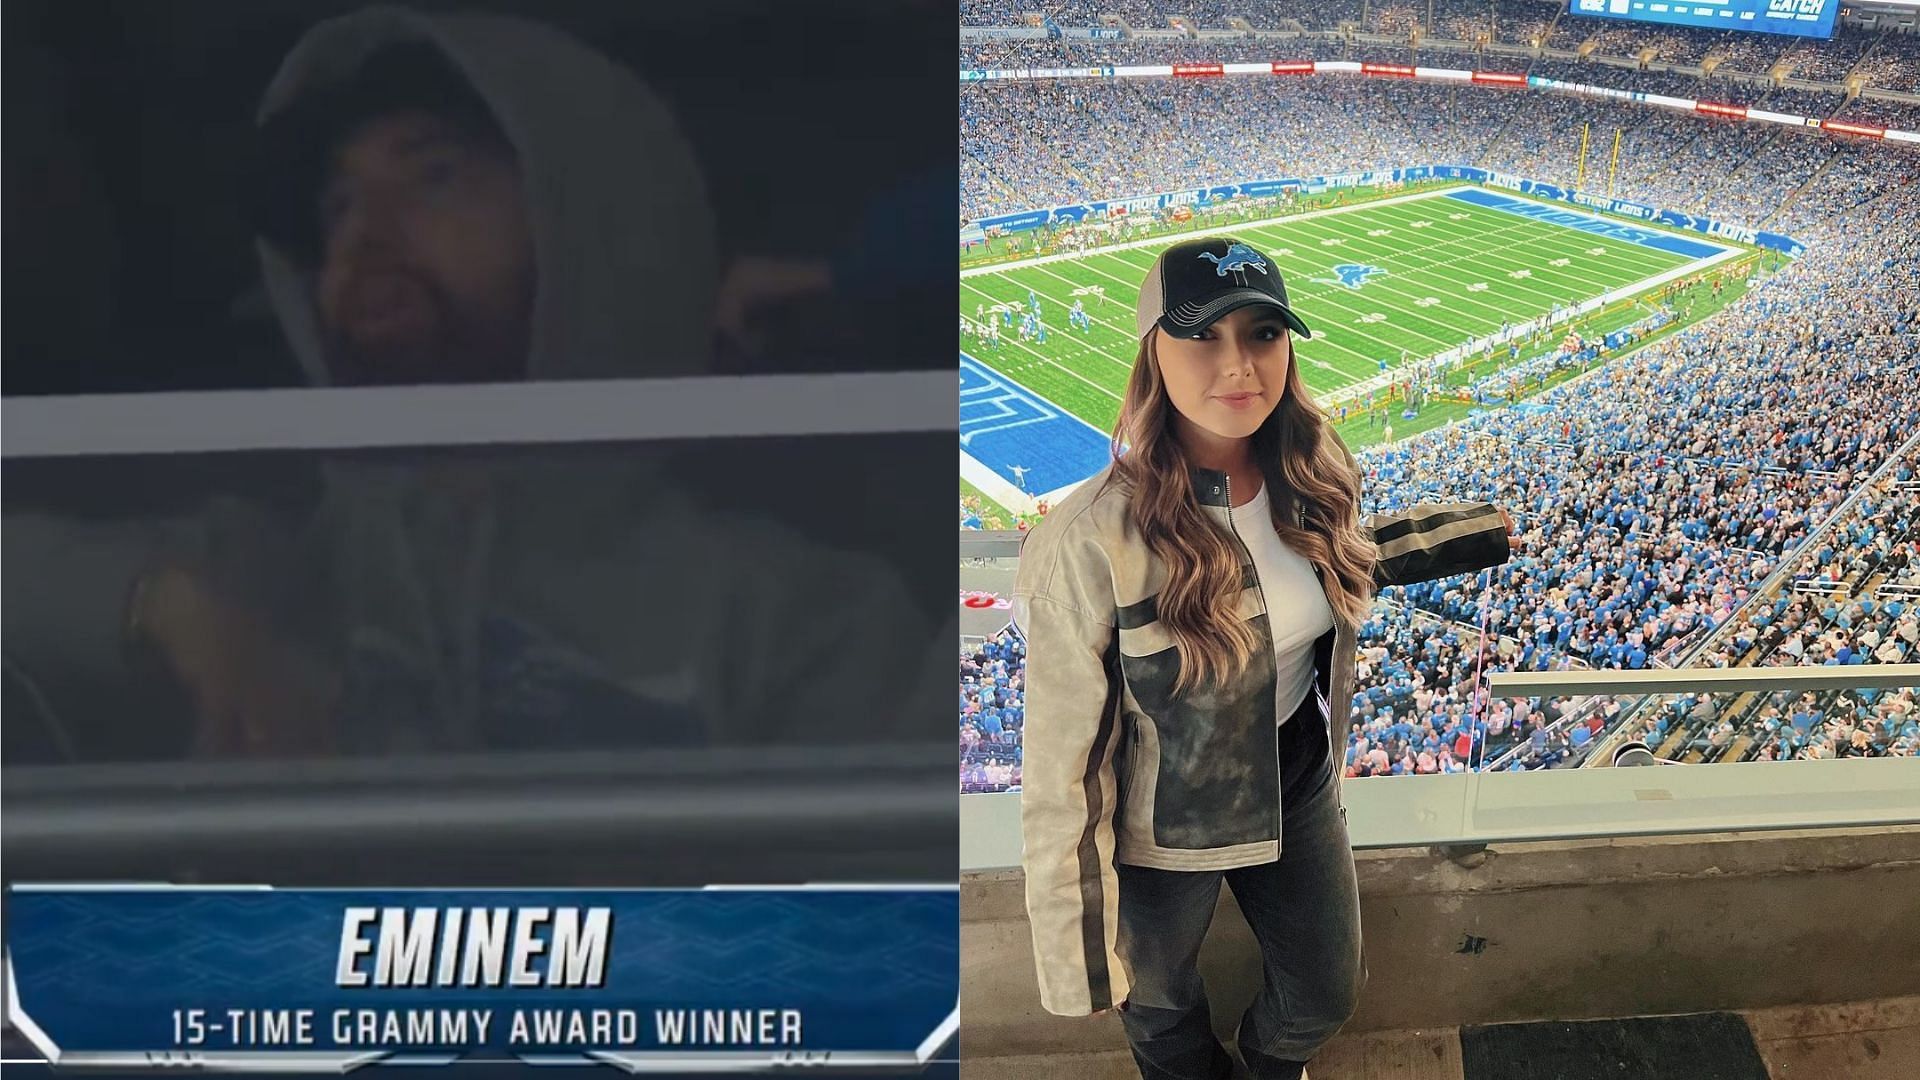 Eminem and his daughter, Hailie Jade, in attendance during a Detroit Lions home game. (Image credit: Fox Sports NFL, Hailie Jade on Instagram)